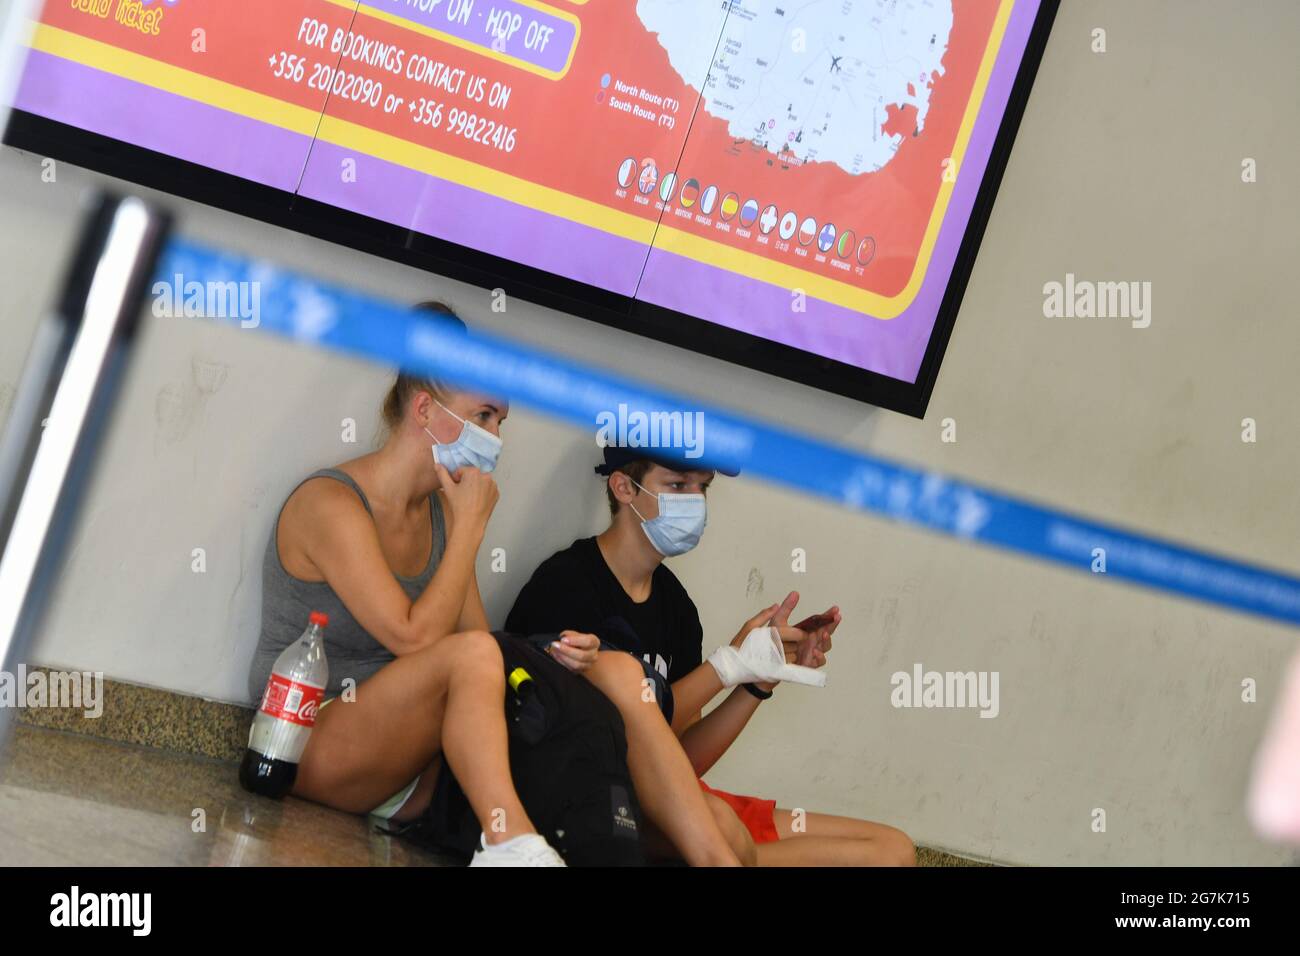 Luqa, Malta. 14th July, 2021. Students are seen at the Malta International Airport in Luqa, Malta, on July 14, 2021. Malta closed its English language teaching schools on Wednesday in an effort to counter a spike in new COVID-19 cases. Credit: Jonathan Borg/Xinhua/Alamy Live News Stock Photo